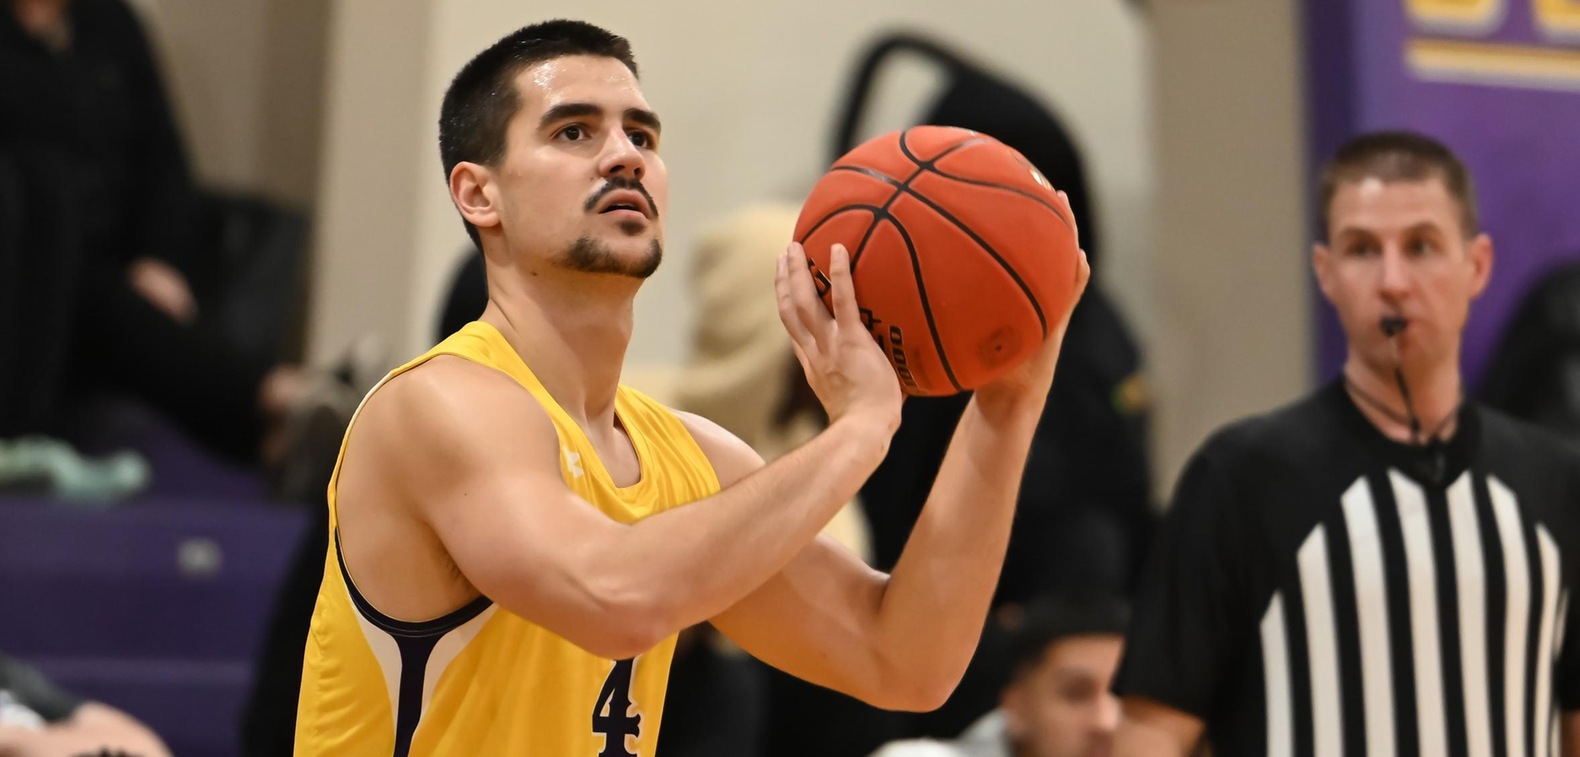 Paulo Araujo led the Bruins with a season-high 24 points on 9-of-11 shooting from the field.